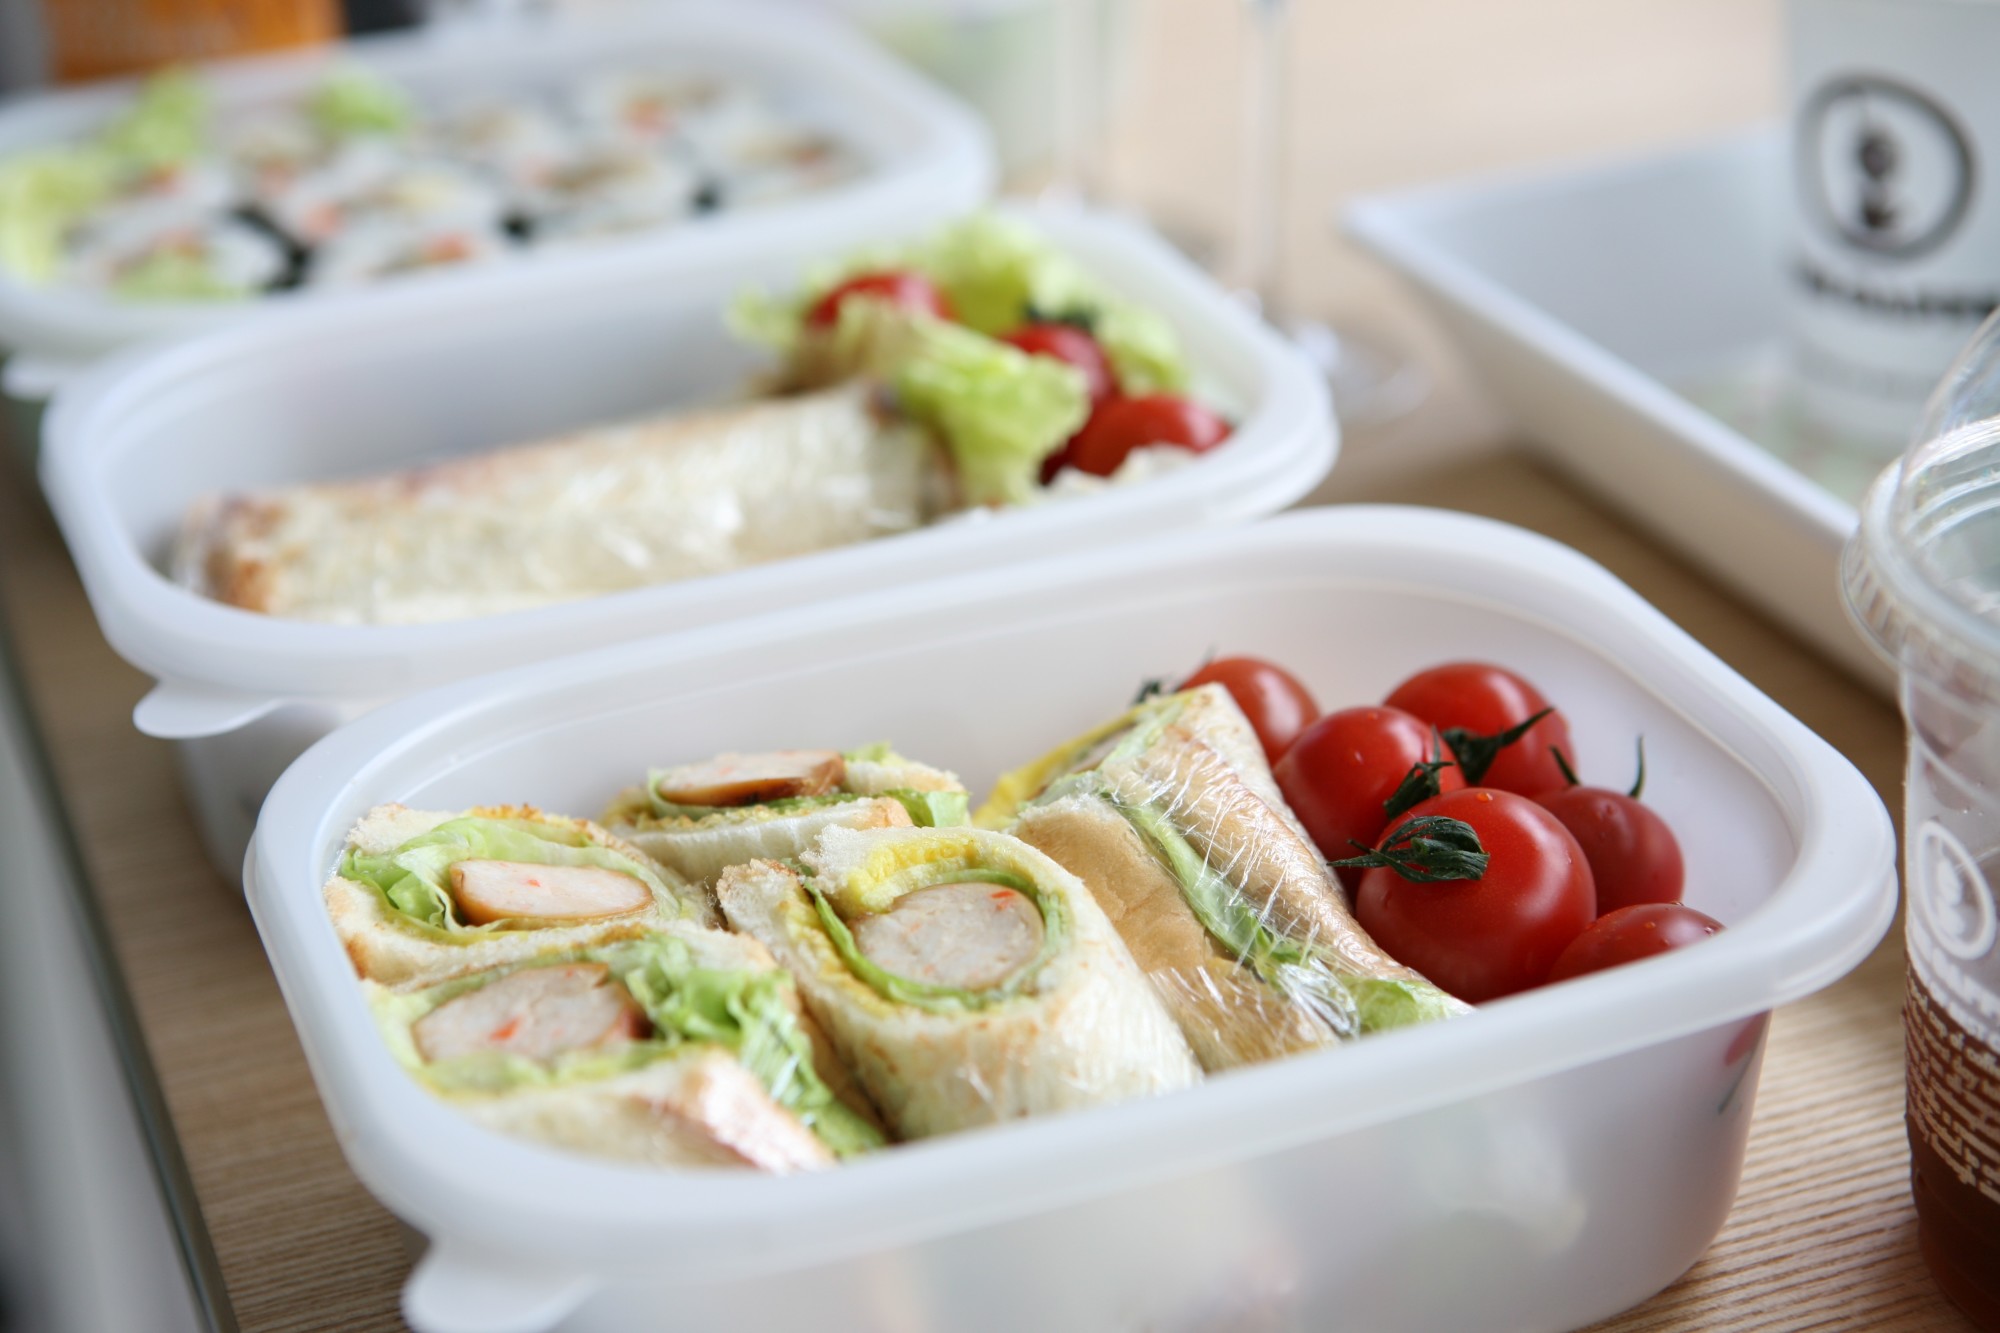 7 Healthy School Lunch Ideas for Your Kids